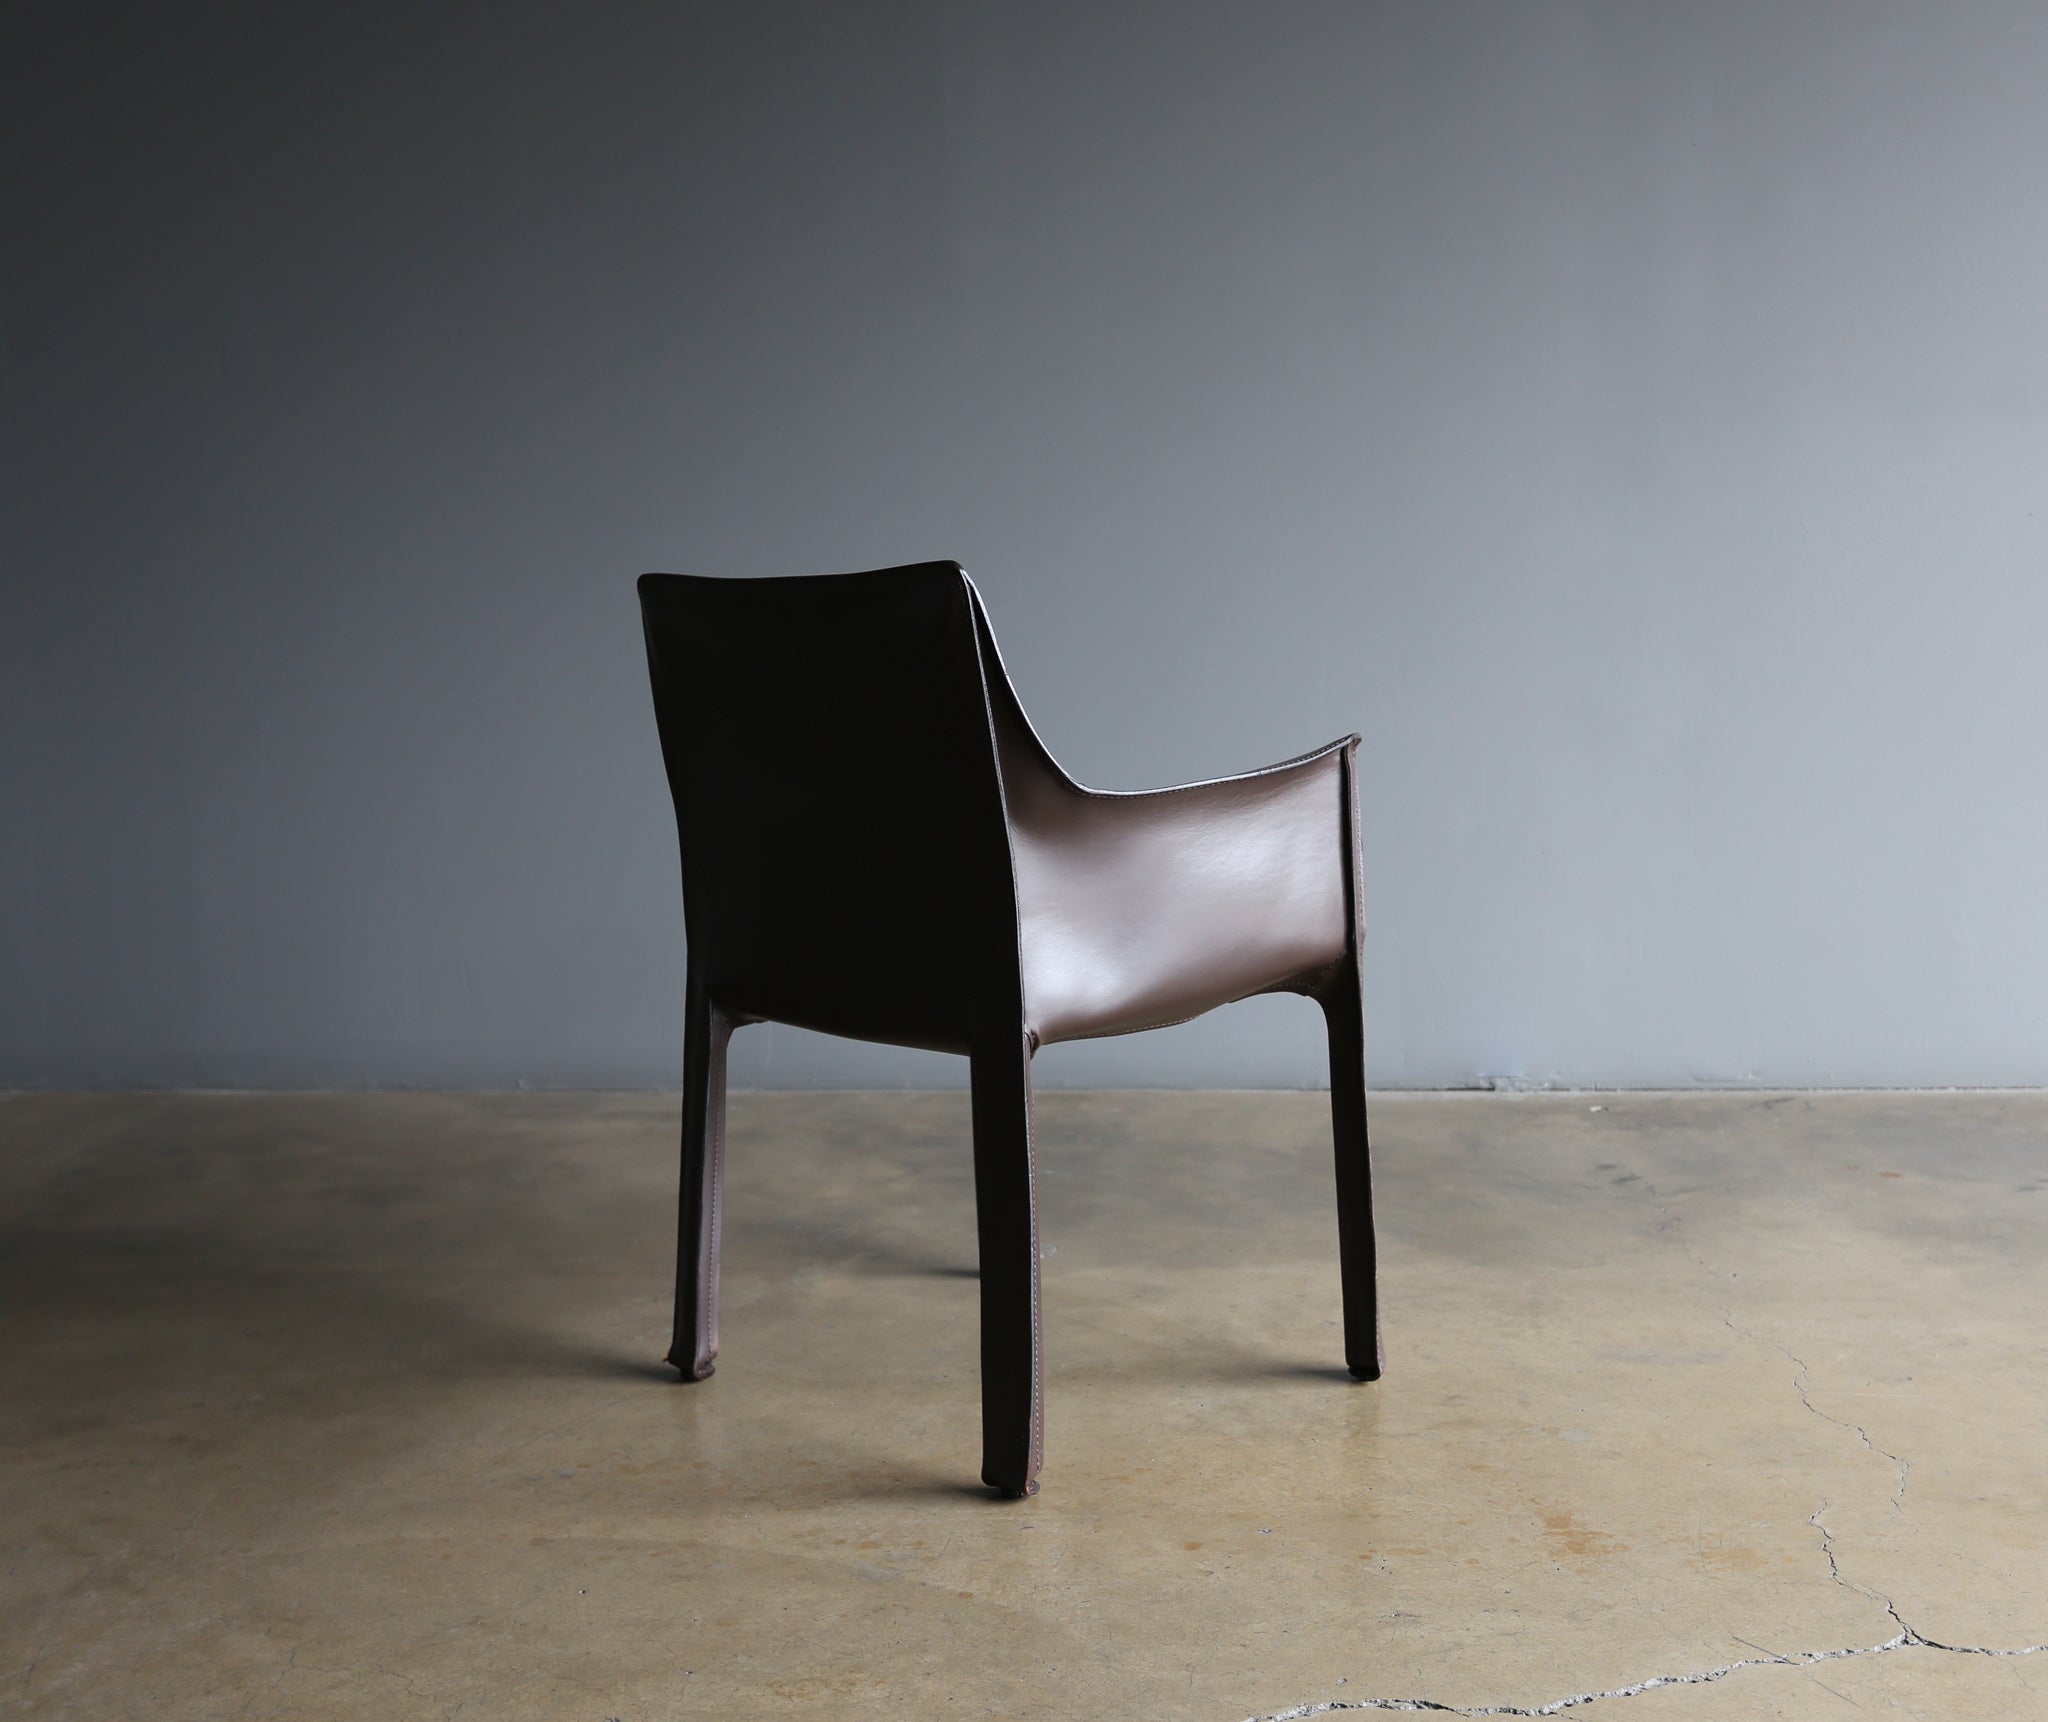 = SOLD = Mario Bellini Brown Leather "Cab" Chairs for Cassina